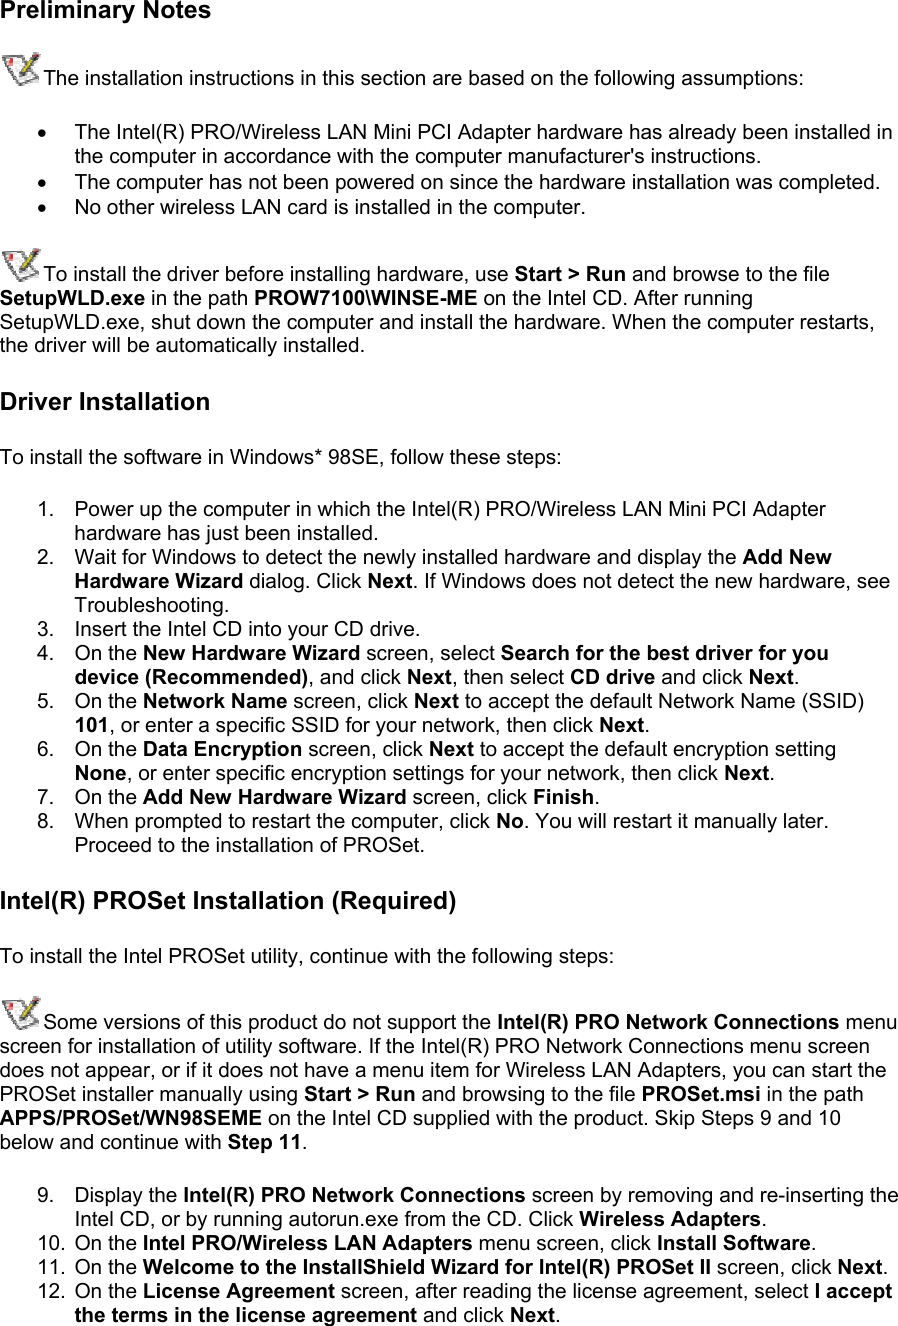 Preliminary Notes The installation instructions in this section are based on the following assumptions: •  The Intel(R) PRO/Wireless LAN Mini PCI Adapter hardware has already been installed in the computer in accordance with the computer manufacturer&apos;s instructions. •  The computer has not been powered on since the hardware installation was completed. •  No other wireless LAN card is installed in the computer. To install the driver before installing hardware, use Start &gt; Run and browse to the file SetupWLD.exe in the path PROW7100\WINSE-ME on the Intel CD. After running SetupWLD.exe, shut down the computer and install the hardware. When the computer restarts, the driver will be automatically installed. Driver Installation To install the software in Windows* 98SE, follow these steps:  1.  Power up the computer in which the Intel(R) PRO/Wireless LAN Mini PCI Adapter hardware has just been installed. 2.  Wait for Windows to detect the newly installed hardware and display the Add New Hardware Wizard dialog. Click Next. If Windows does not detect the new hardware, see Troubleshooting. 3.  Insert the Intel CD into your CD drive.  4. On the New Hardware Wizard screen, select Search for the best driver for you device (Recommended), and click Next, then select CD drive and click Next. 5. On the Network Name screen, click Next to accept the default Network Name (SSID) 101, or enter a specific SSID for your network, then click Next. 6. On the Data Encryption screen, click Next to accept the default encryption setting None, or enter specific encryption settings for your network, then click Next. 7. On the Add New Hardware Wizard screen, click Finish. 8.  When prompted to restart the computer, click No. You will restart it manually later. Proceed to the installation of PROSet. Intel(R) PROSet Installation (Required) To install the Intel PROSet utility, continue with the following steps: Some versions of this product do not support the Intel(R) PRO Network Connections menu screen for installation of utility software. If the Intel(R) PRO Network Connections menu screen does not appear, or if it does not have a menu item for Wireless LAN Adapters, you can start the PROSet installer manually using Start &gt; Run and browsing to the file PROSet.msi in the path APPS/PROSet/WN98SEME on the Intel CD supplied with the product. Skip Steps 9 and 10 below and continue with Step 11.  9. Display the Intel(R) PRO Network Connections screen by removing and re-inserting the Intel CD, or by running autorun.exe from the CD. Click Wireless Adapters. 10. On the Intel PRO/Wireless LAN Adapters menu screen, click Install Software. 11. On the Welcome to the InstallShield Wizard for Intel(R) PROSet II screen, click Next. 12. On the License Agreement screen, after reading the license agreement, select I accept the terms in the license agreement and click Next. 